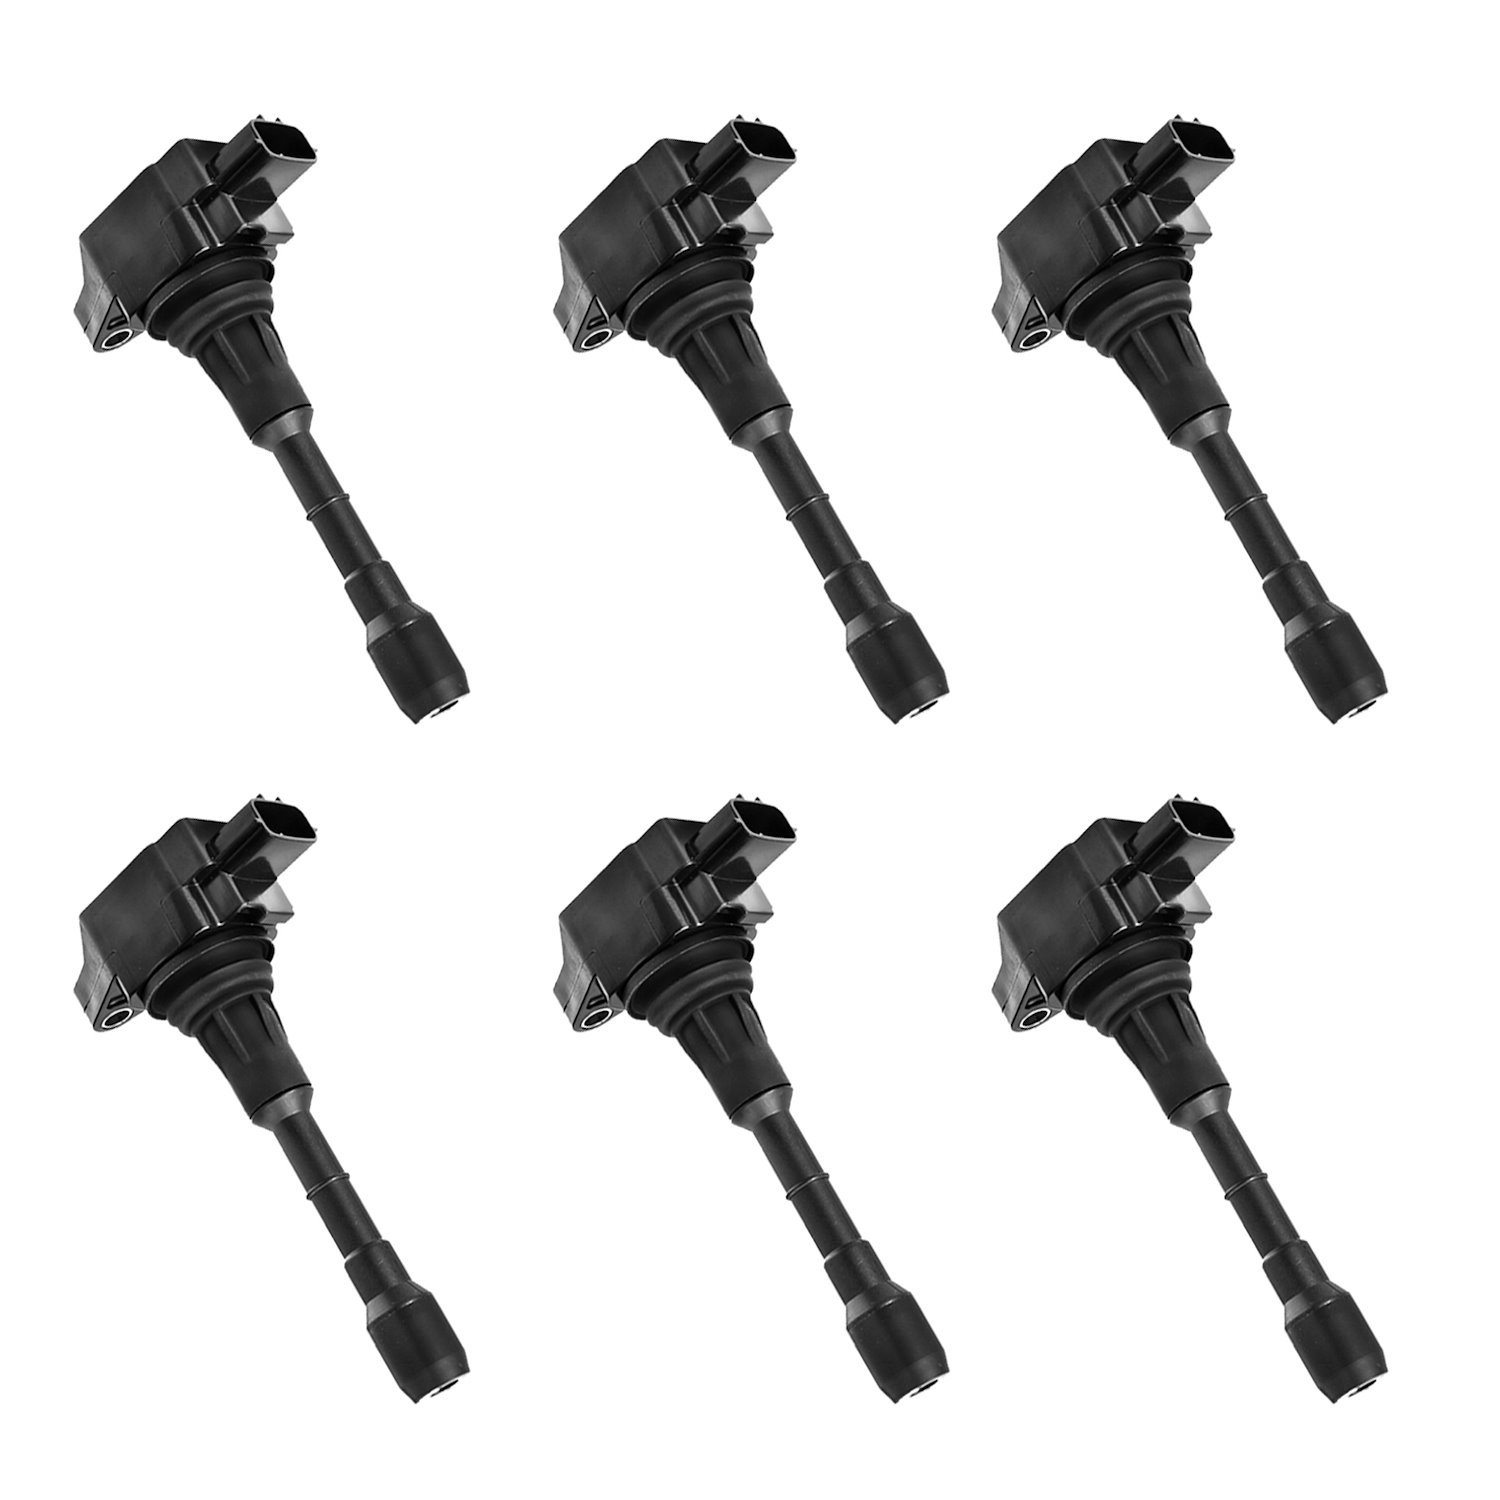 OE Replacement Ignition Coils for Infiniti G25 Nissan Maxima 3.5 V6